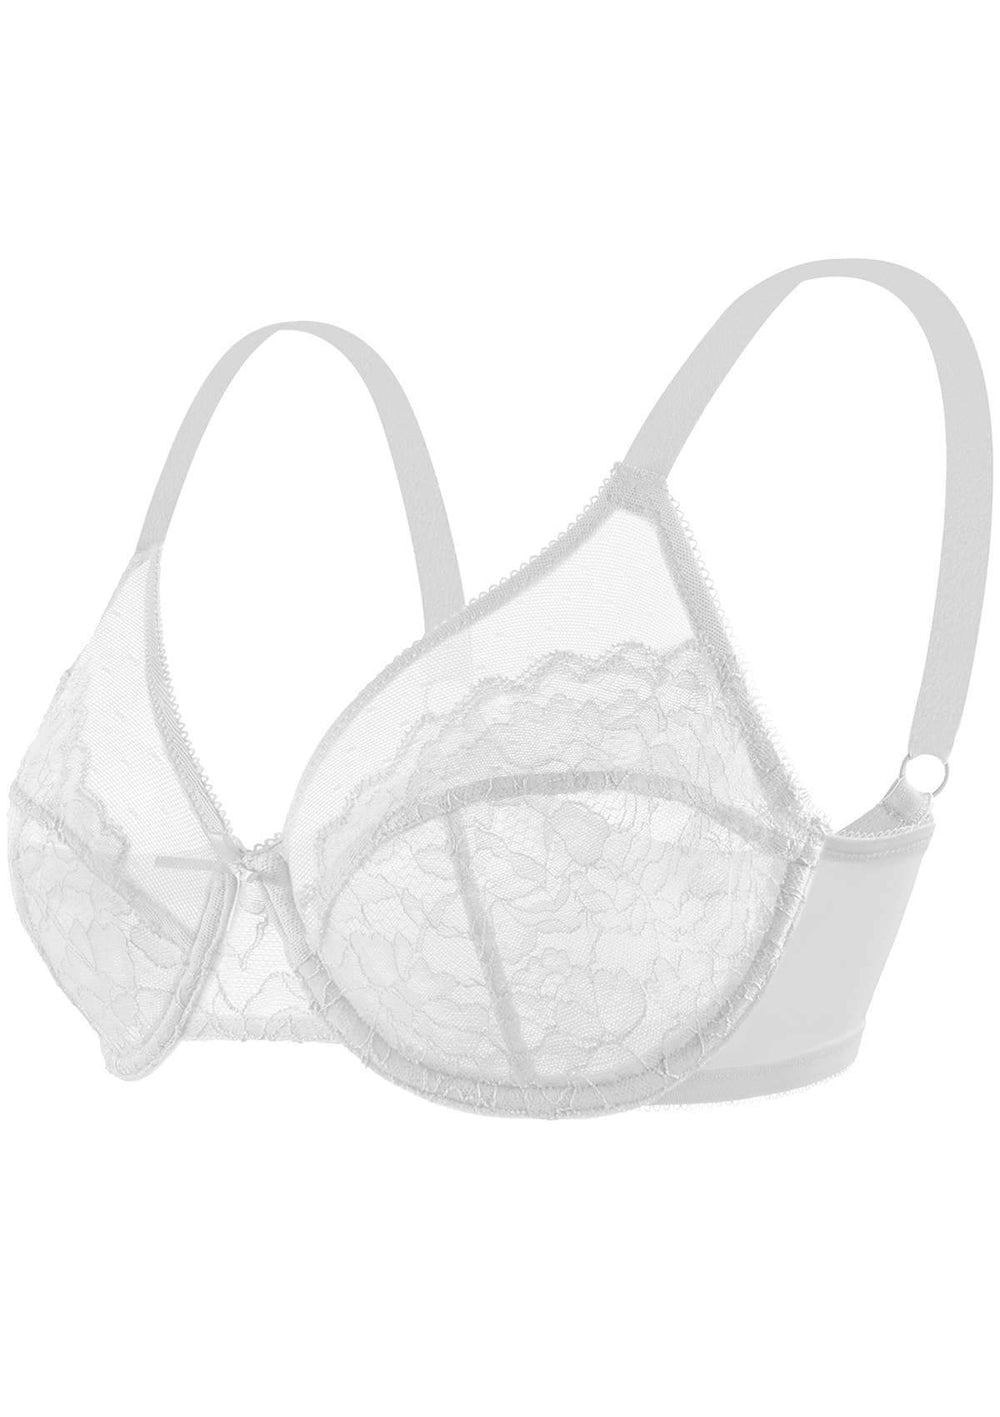 Heaven Lace Padded Bra - White Lace Bra Png - Free Transparent PNG